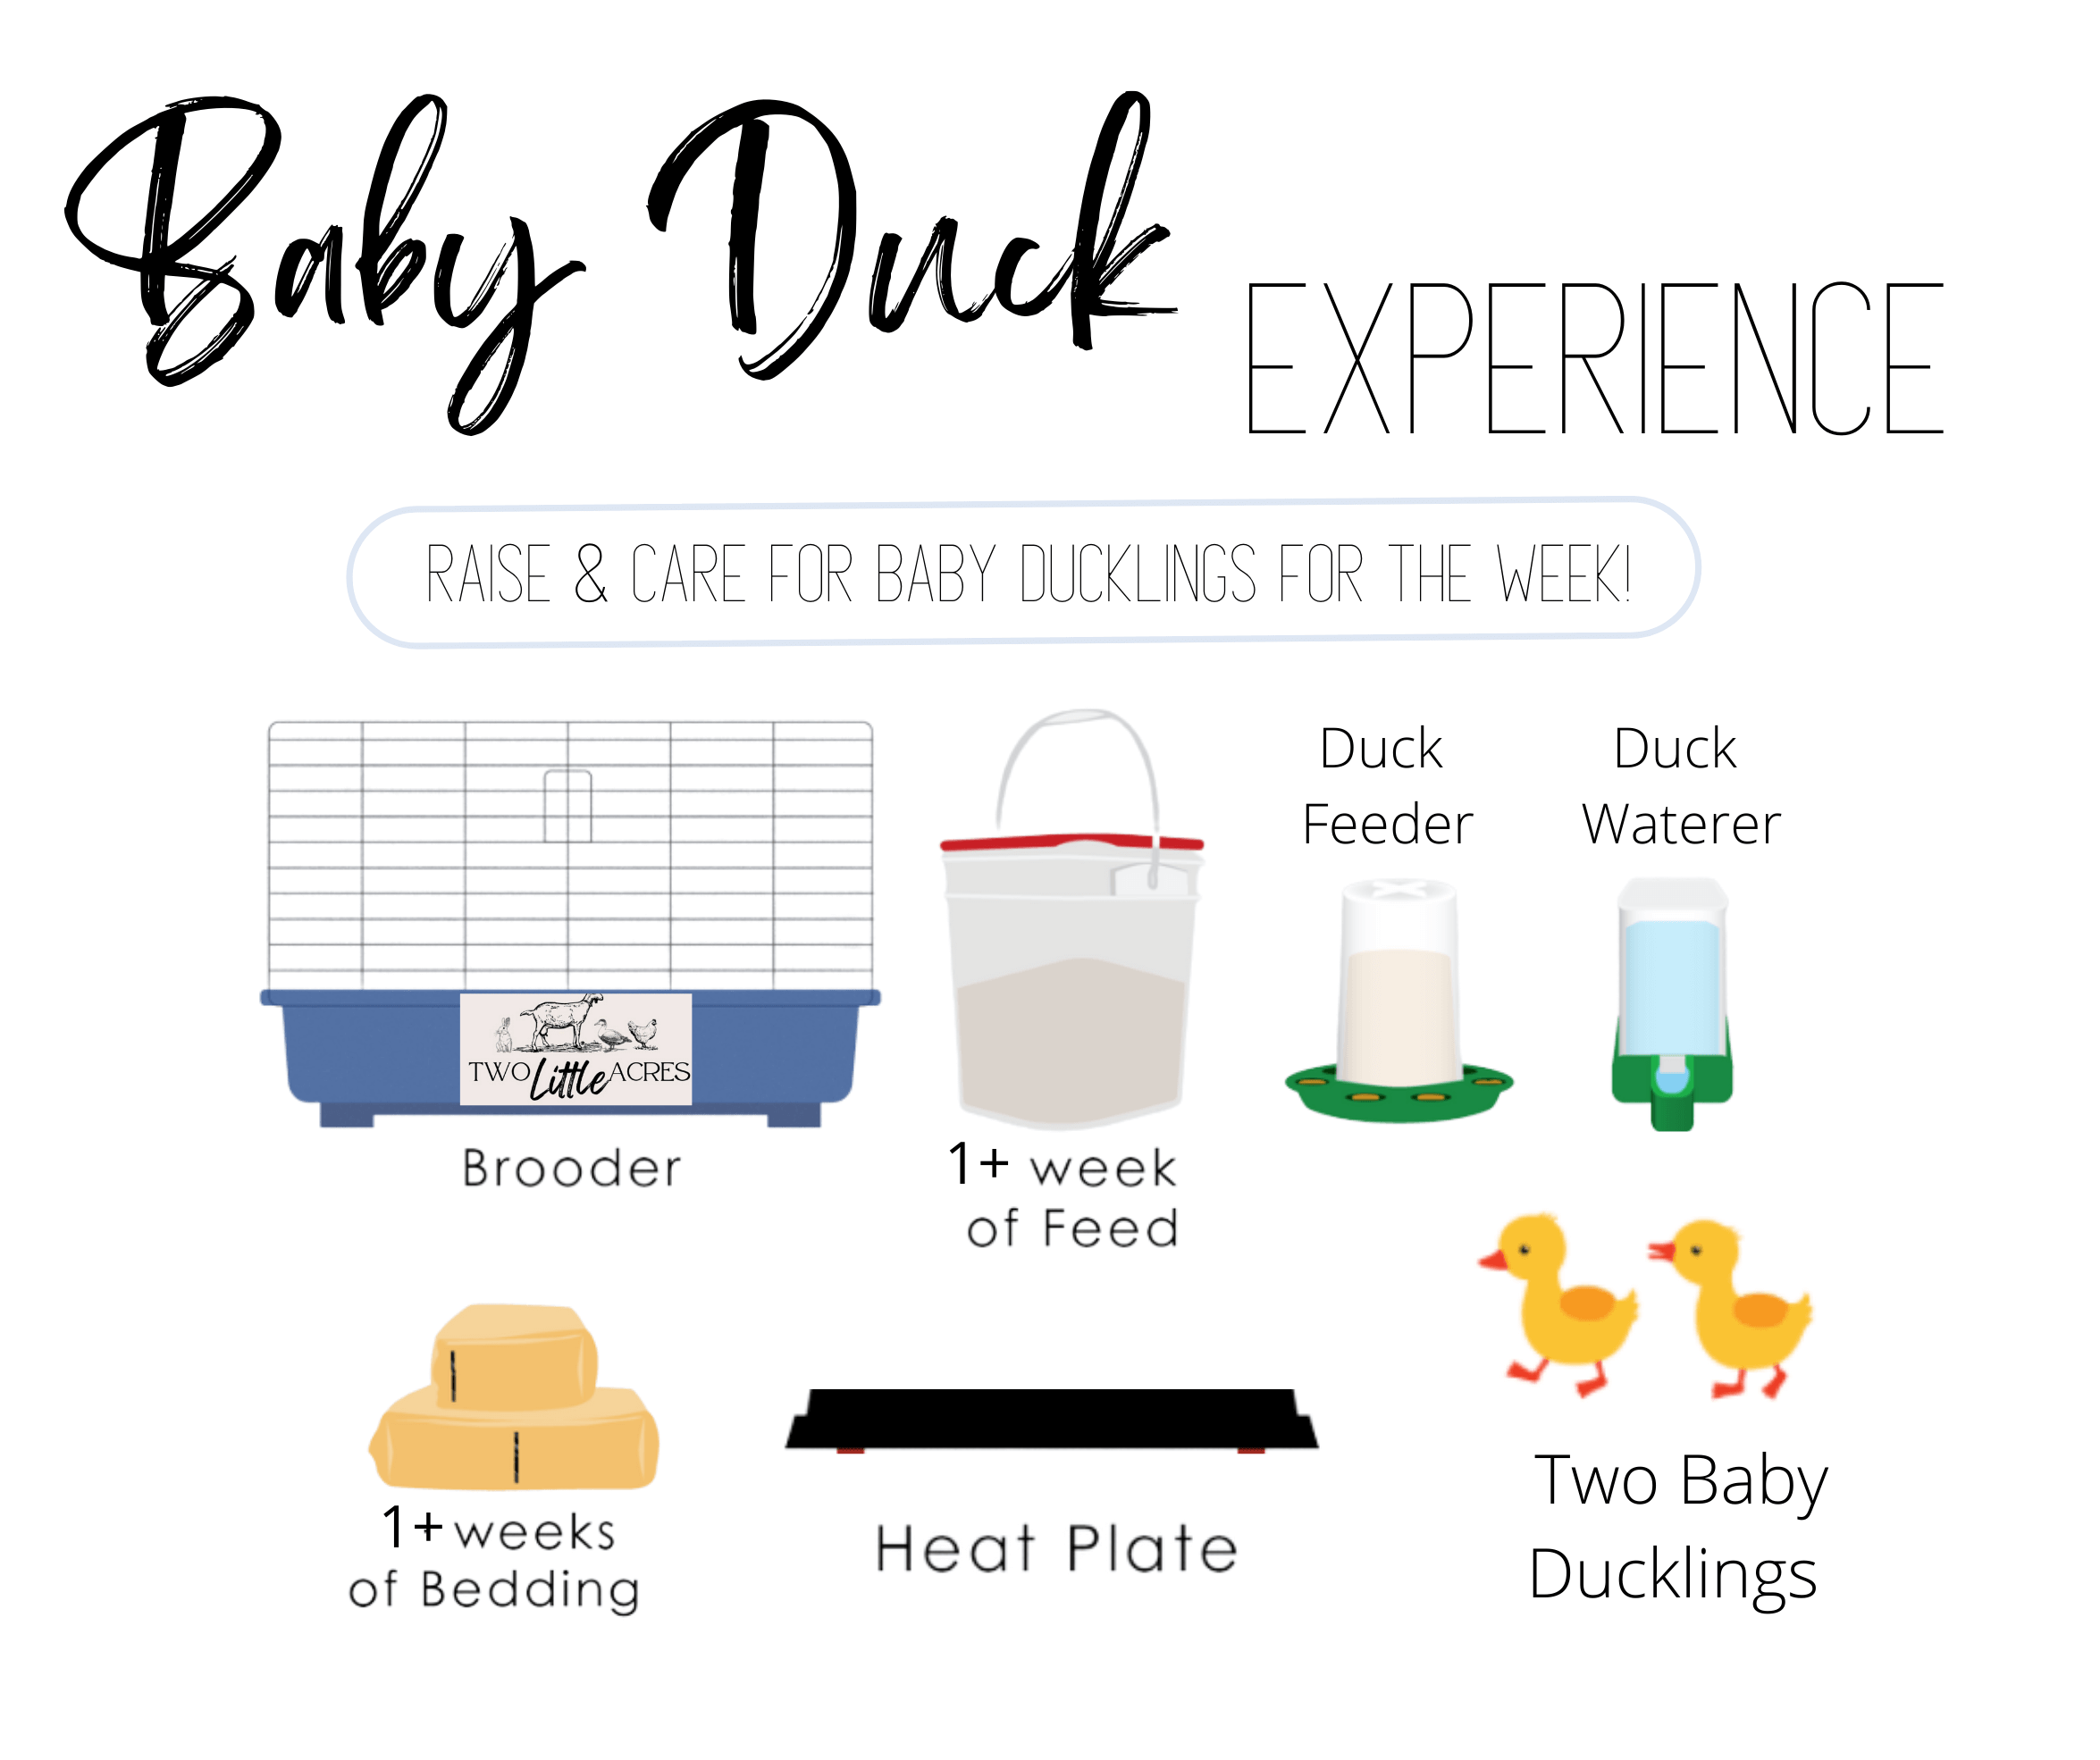 Care Recommendations For Ducklings - The Open Sanctuary Project